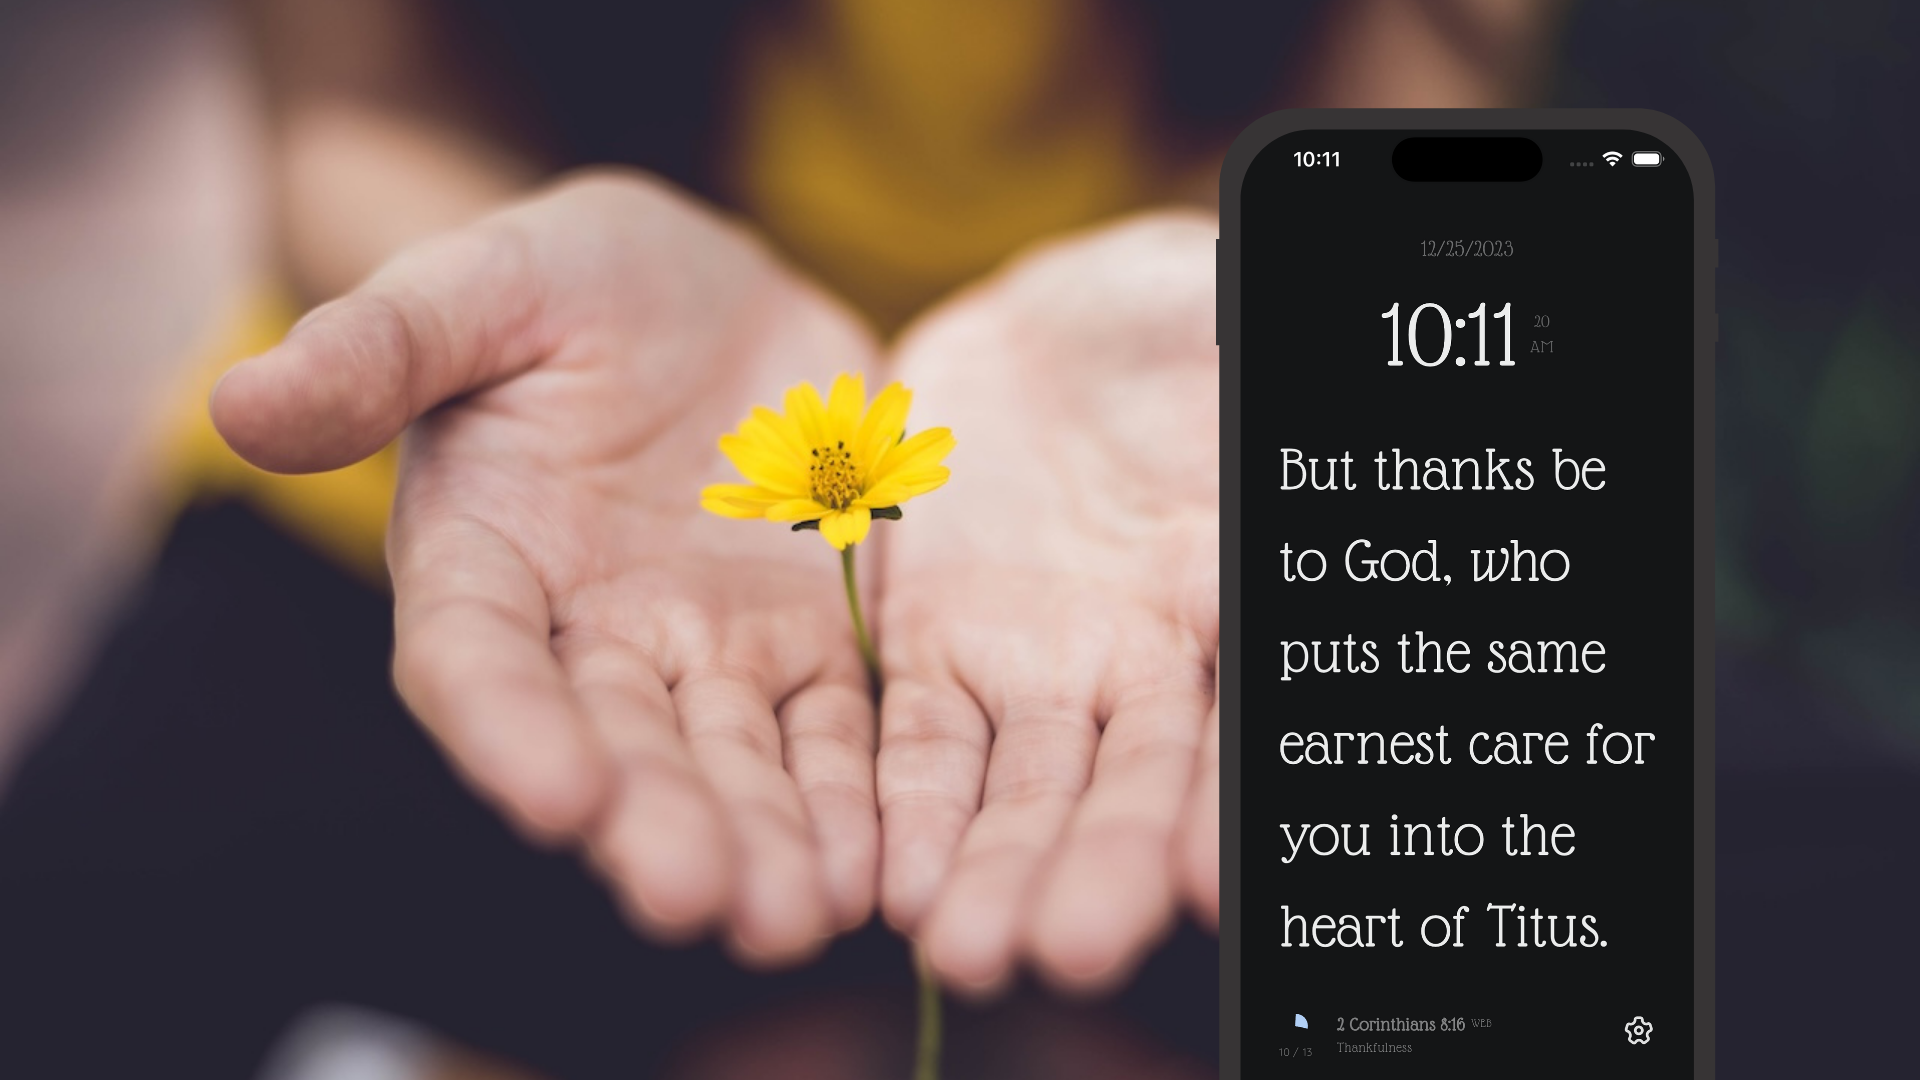 Bible Clock 0.9.8: Discover 13 Inspiring Bible Verses in the New "Thankfulness" Collection